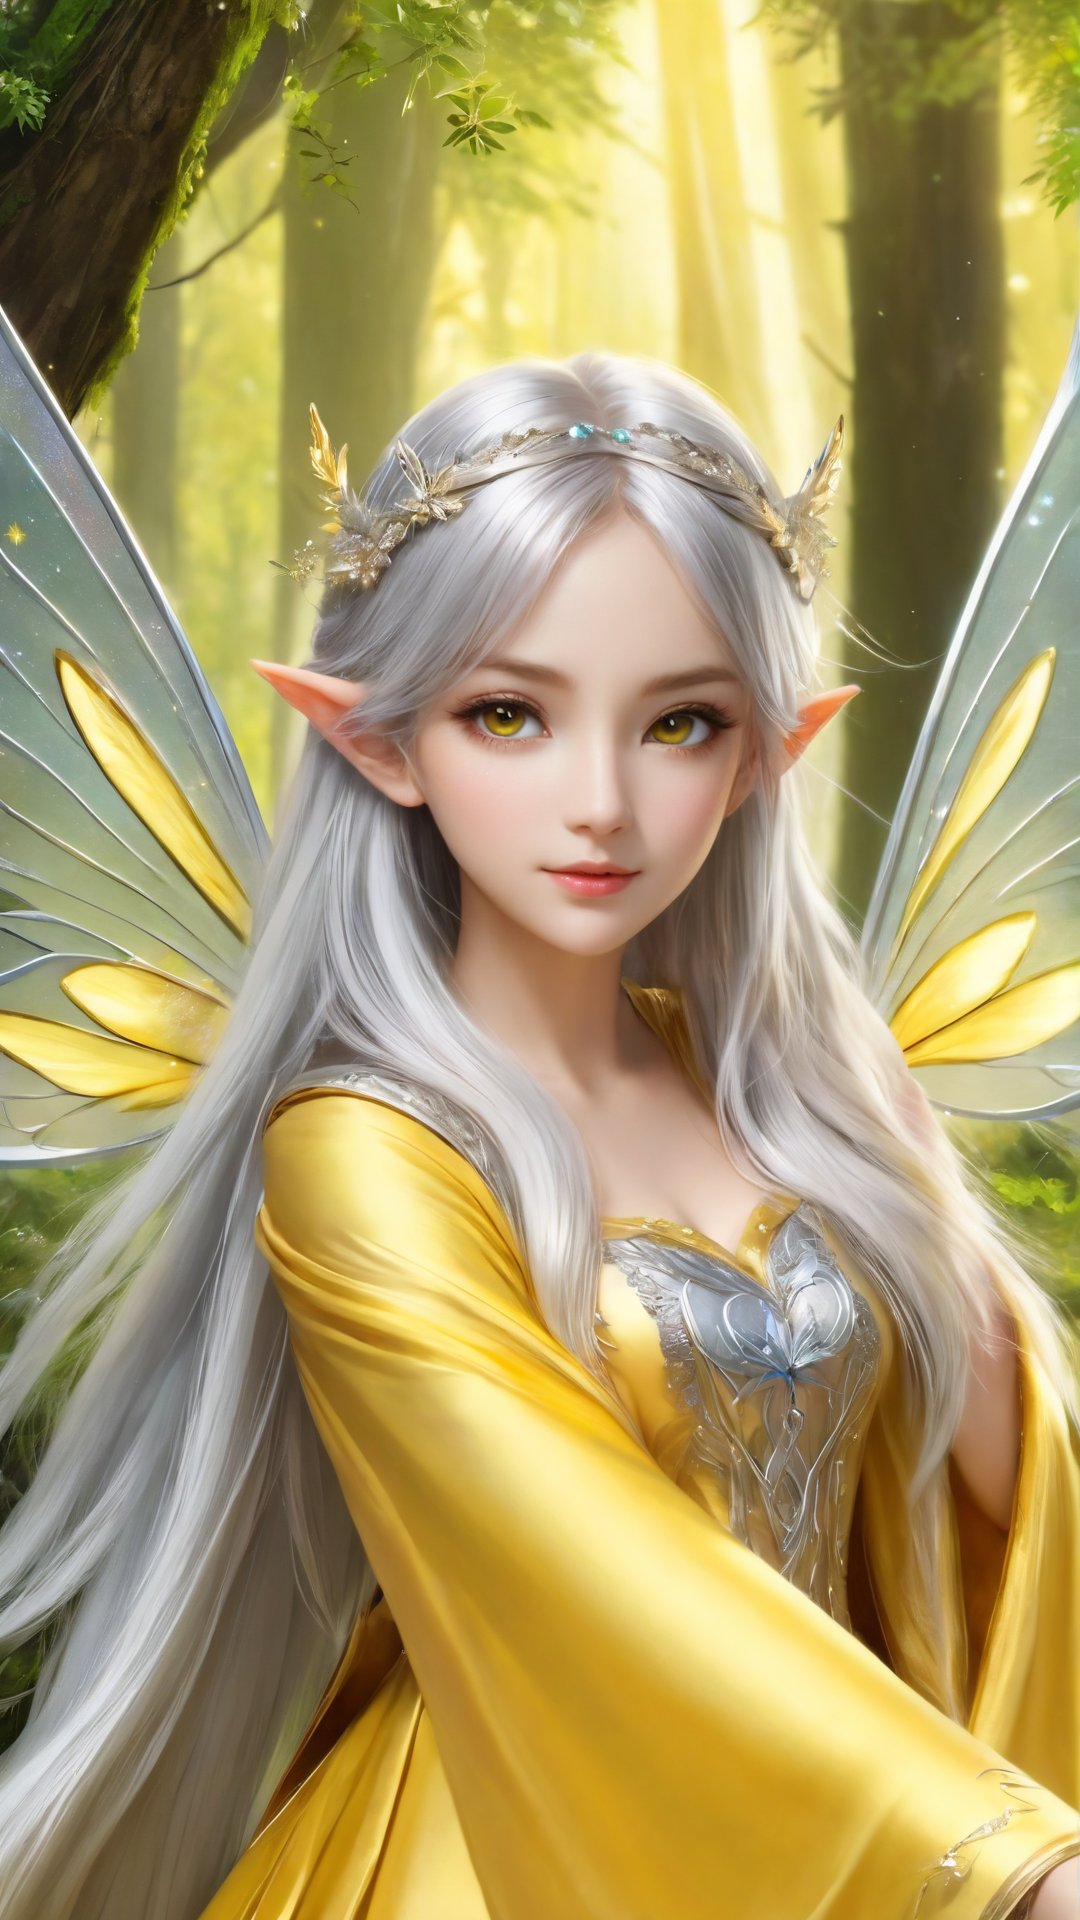 Beautiful sparkling eyes,1girl, fairy of the North, fur, fairy wings, silver long hair, yellow cloth, High quality, detailed, masterpiece, deep forest background